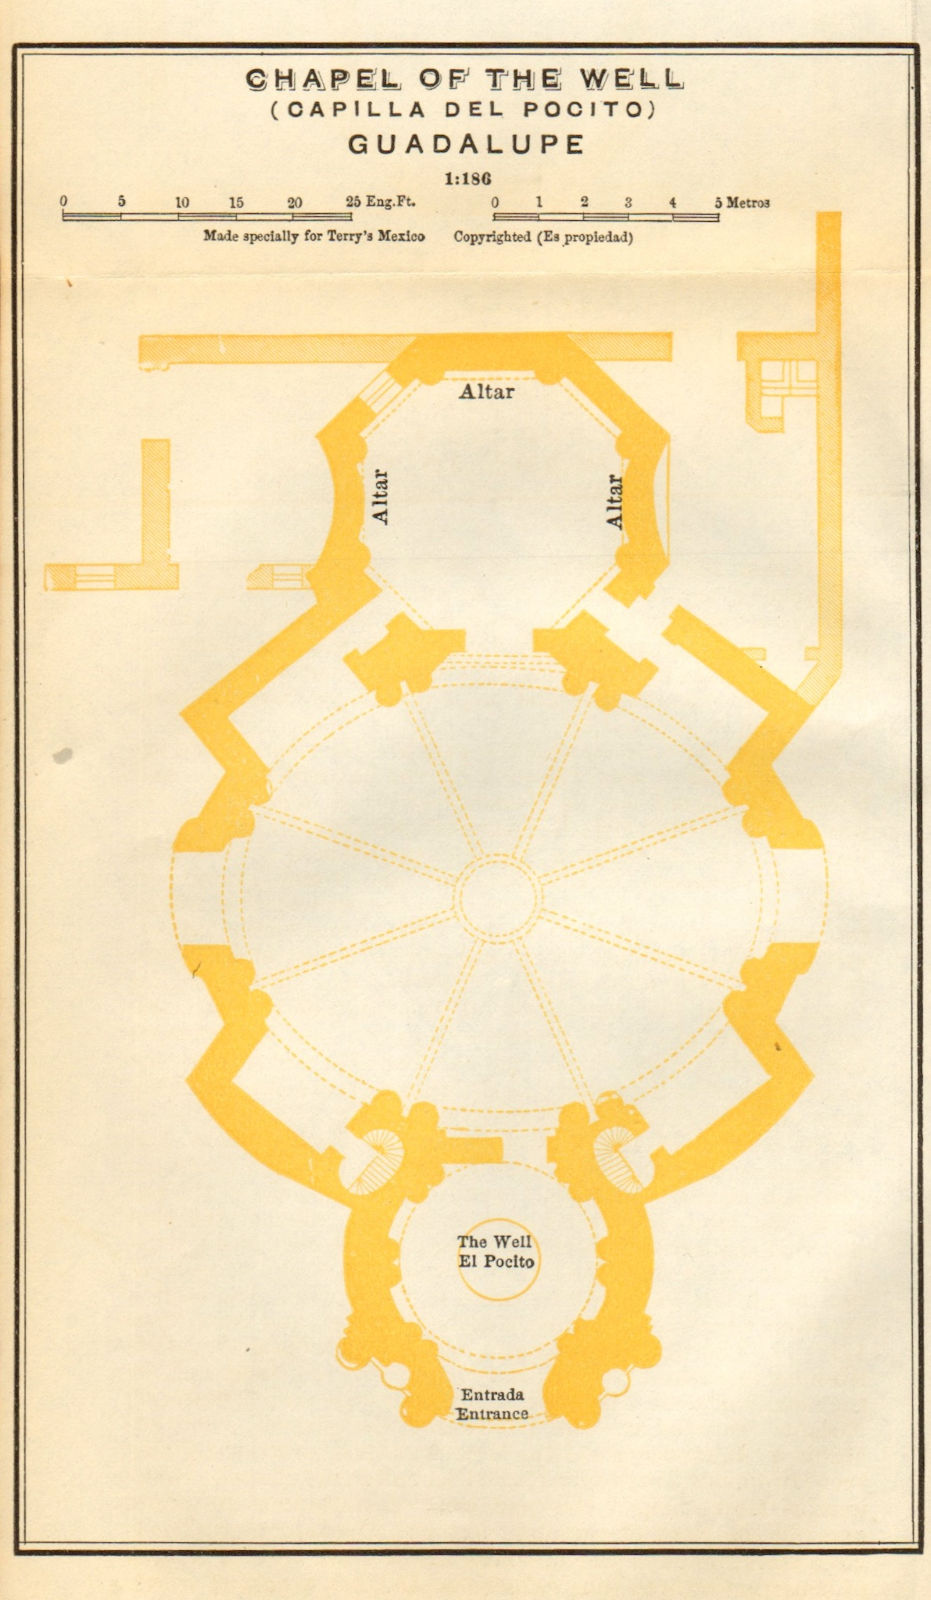 Associate Product Chapel of the well (Capilla del Pocito) Guadalupe, Mexico City 1935 old map